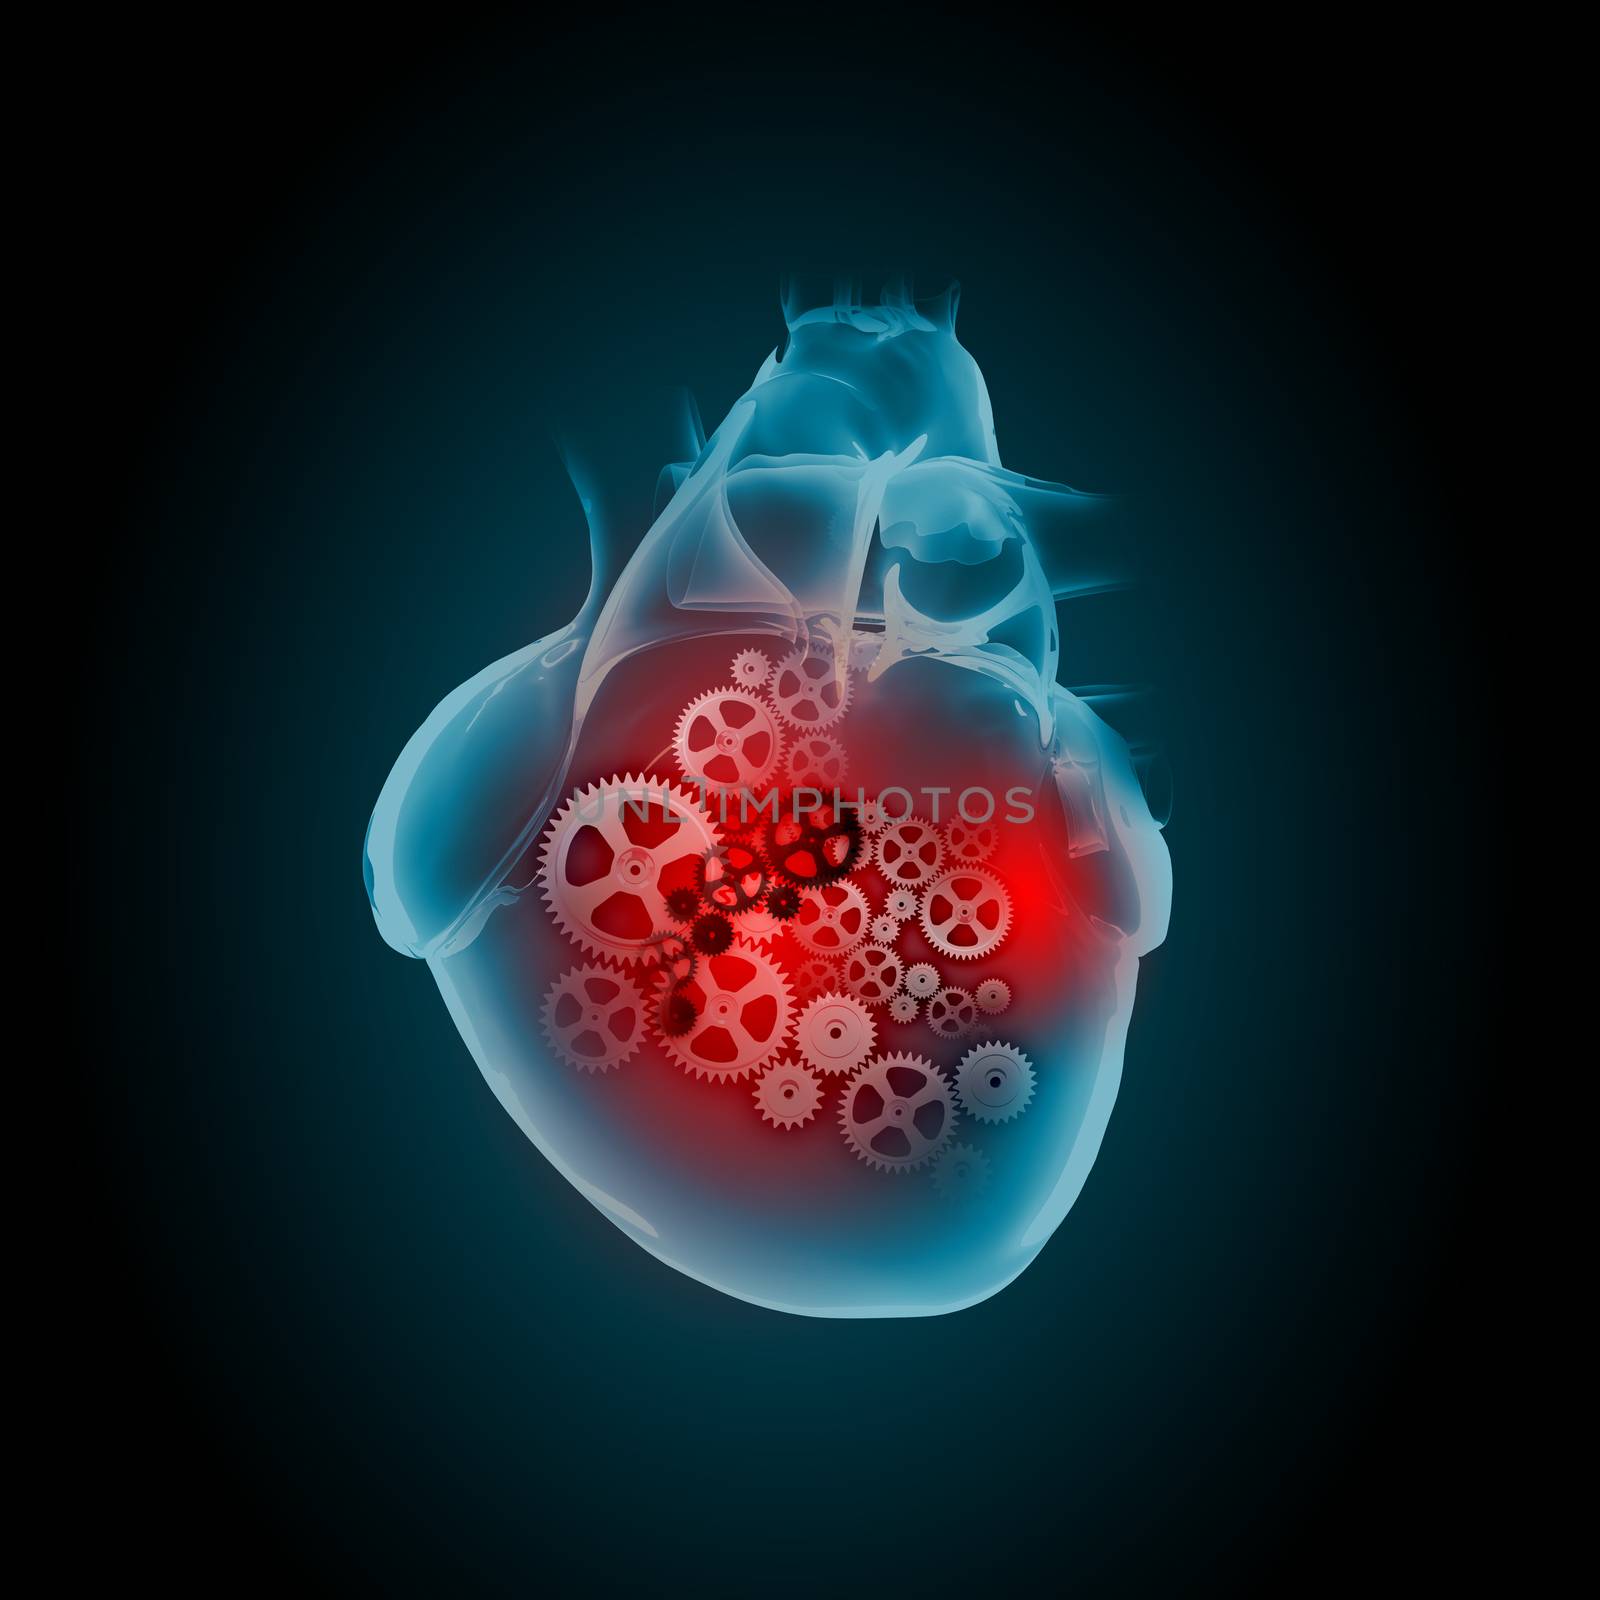 Human heart by sergey_nivens